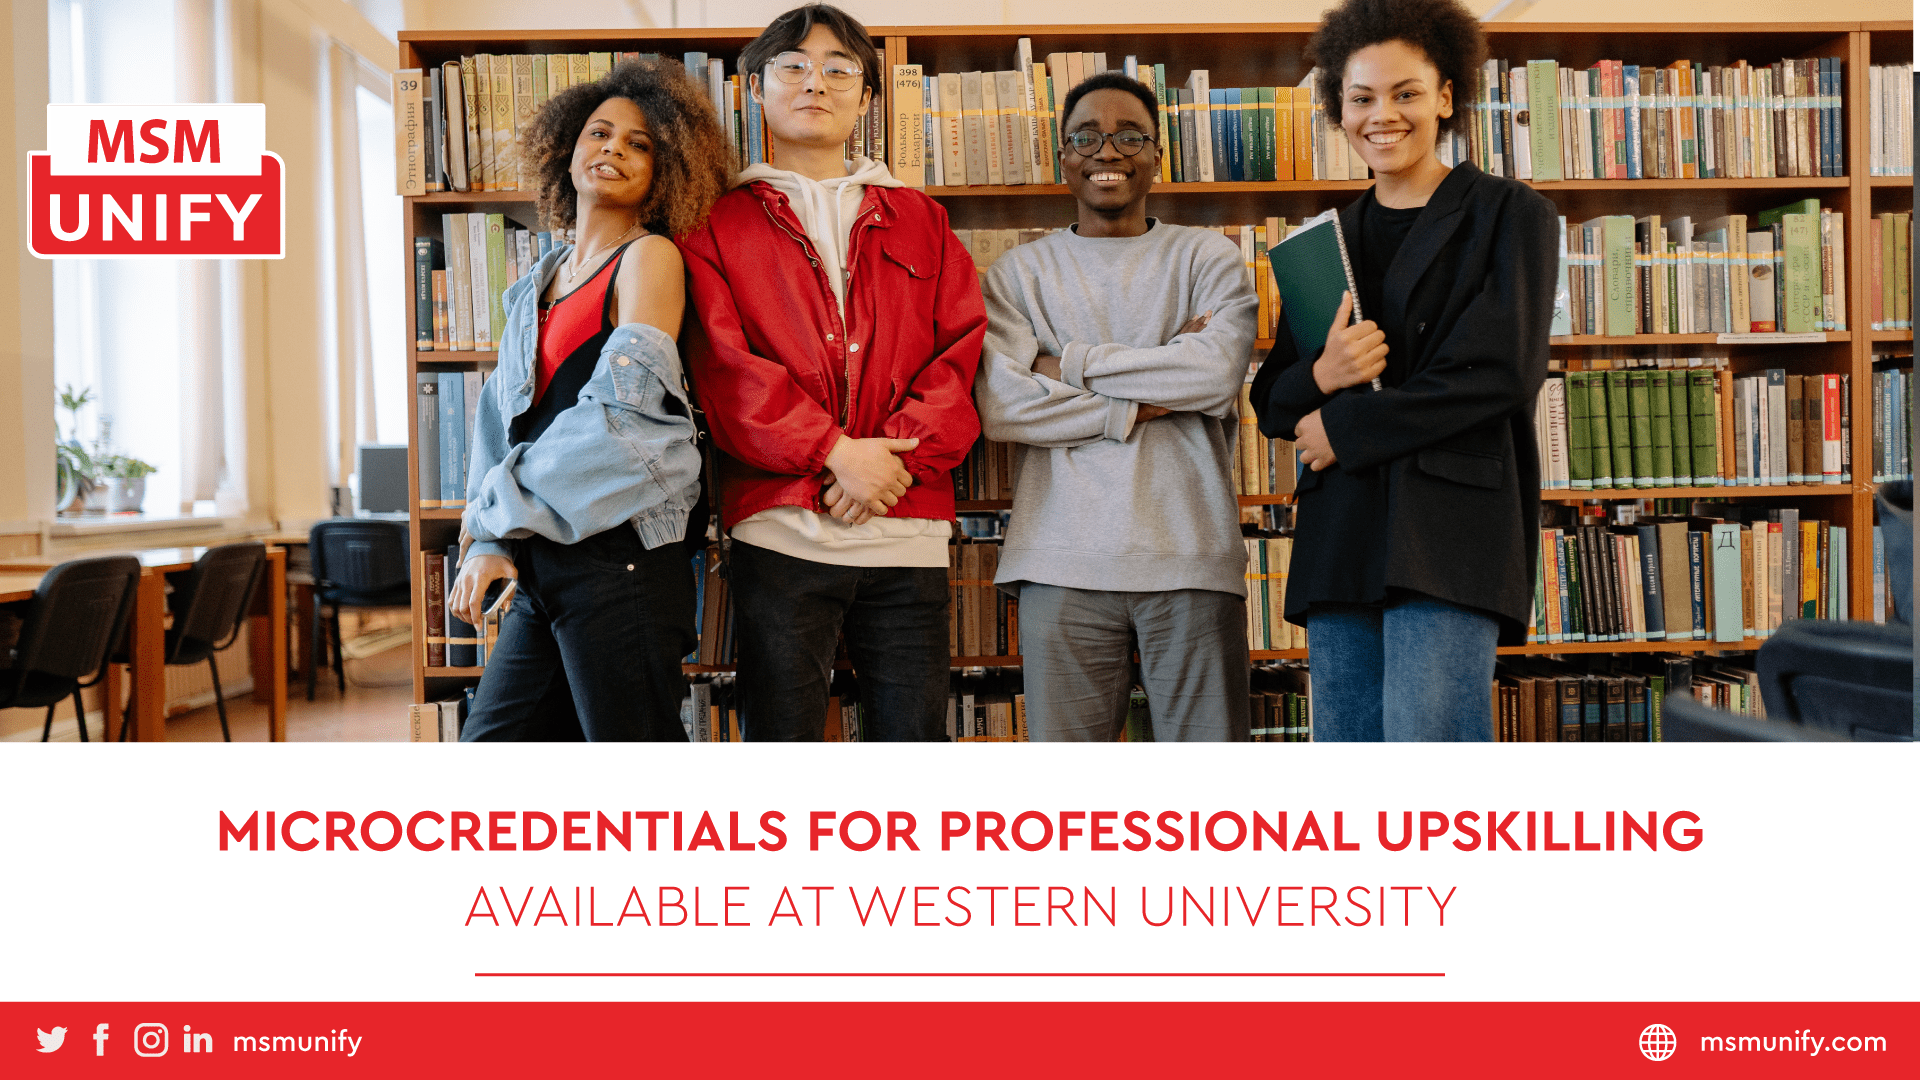 MSM Unify Microcredentials For Professional Upskilling Available at Western University min